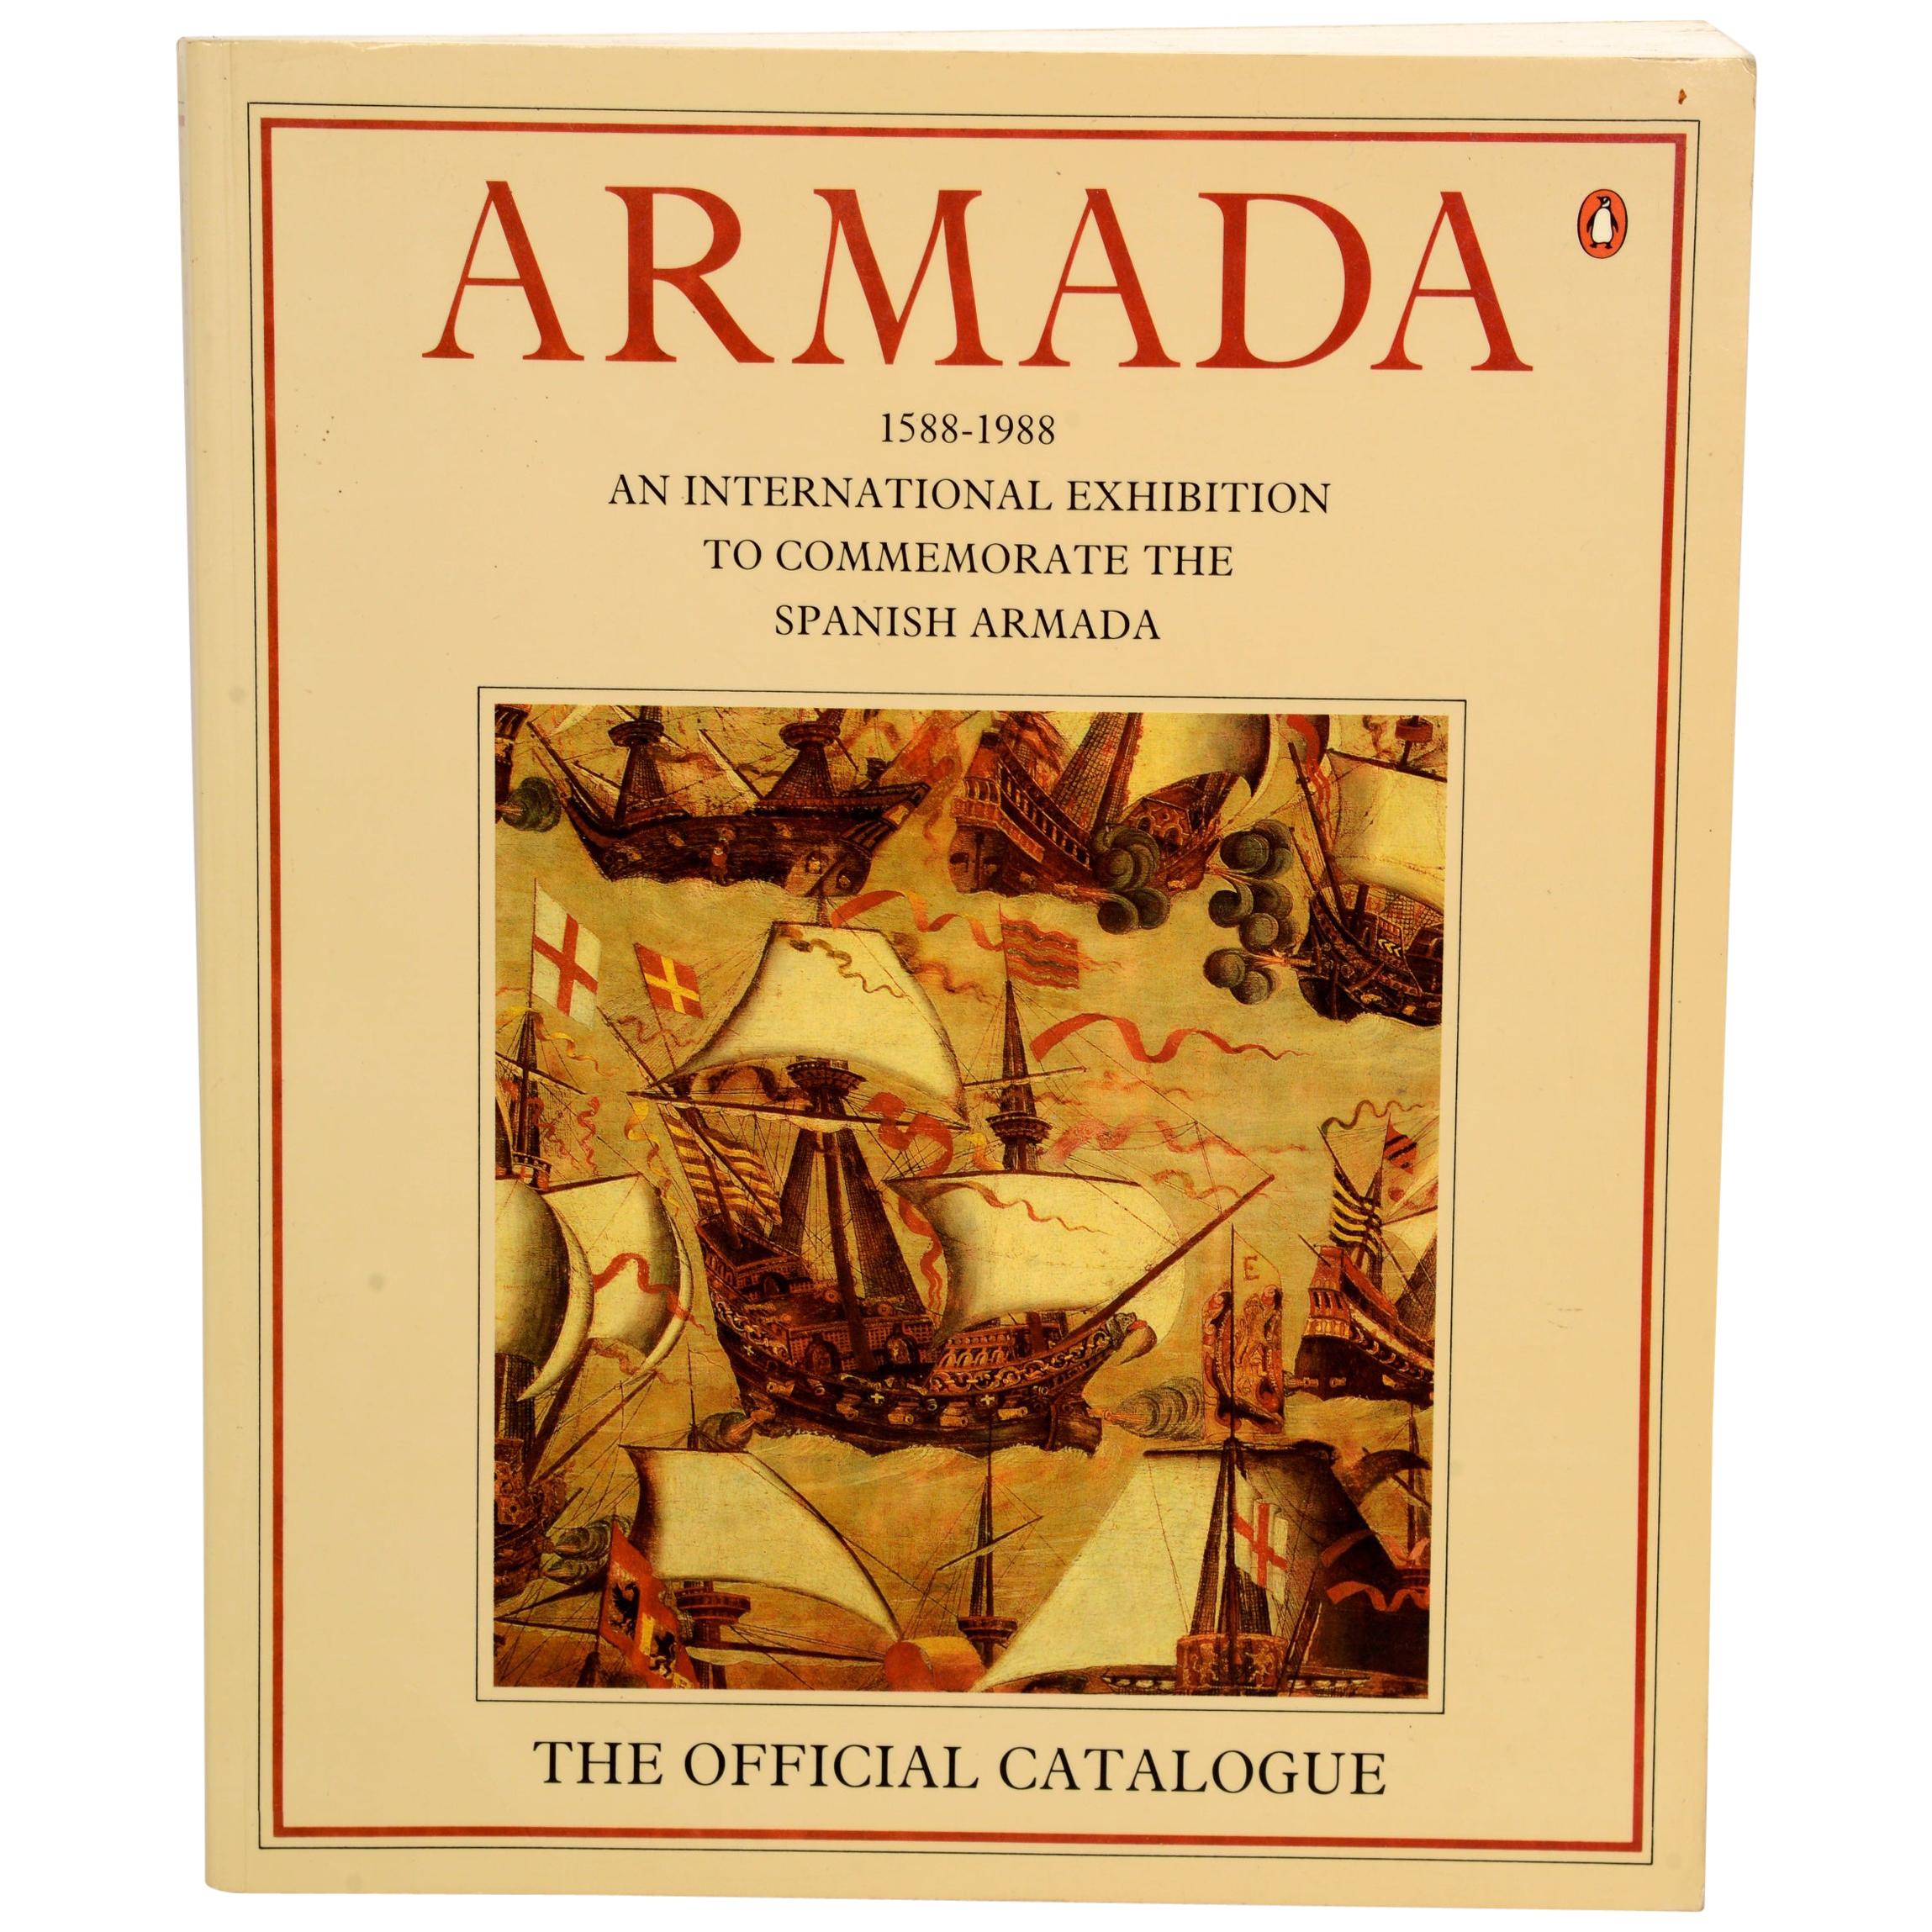 Armada, 1588-1988 An International Exhibition to Commemorate the Spanish Armada For Sale